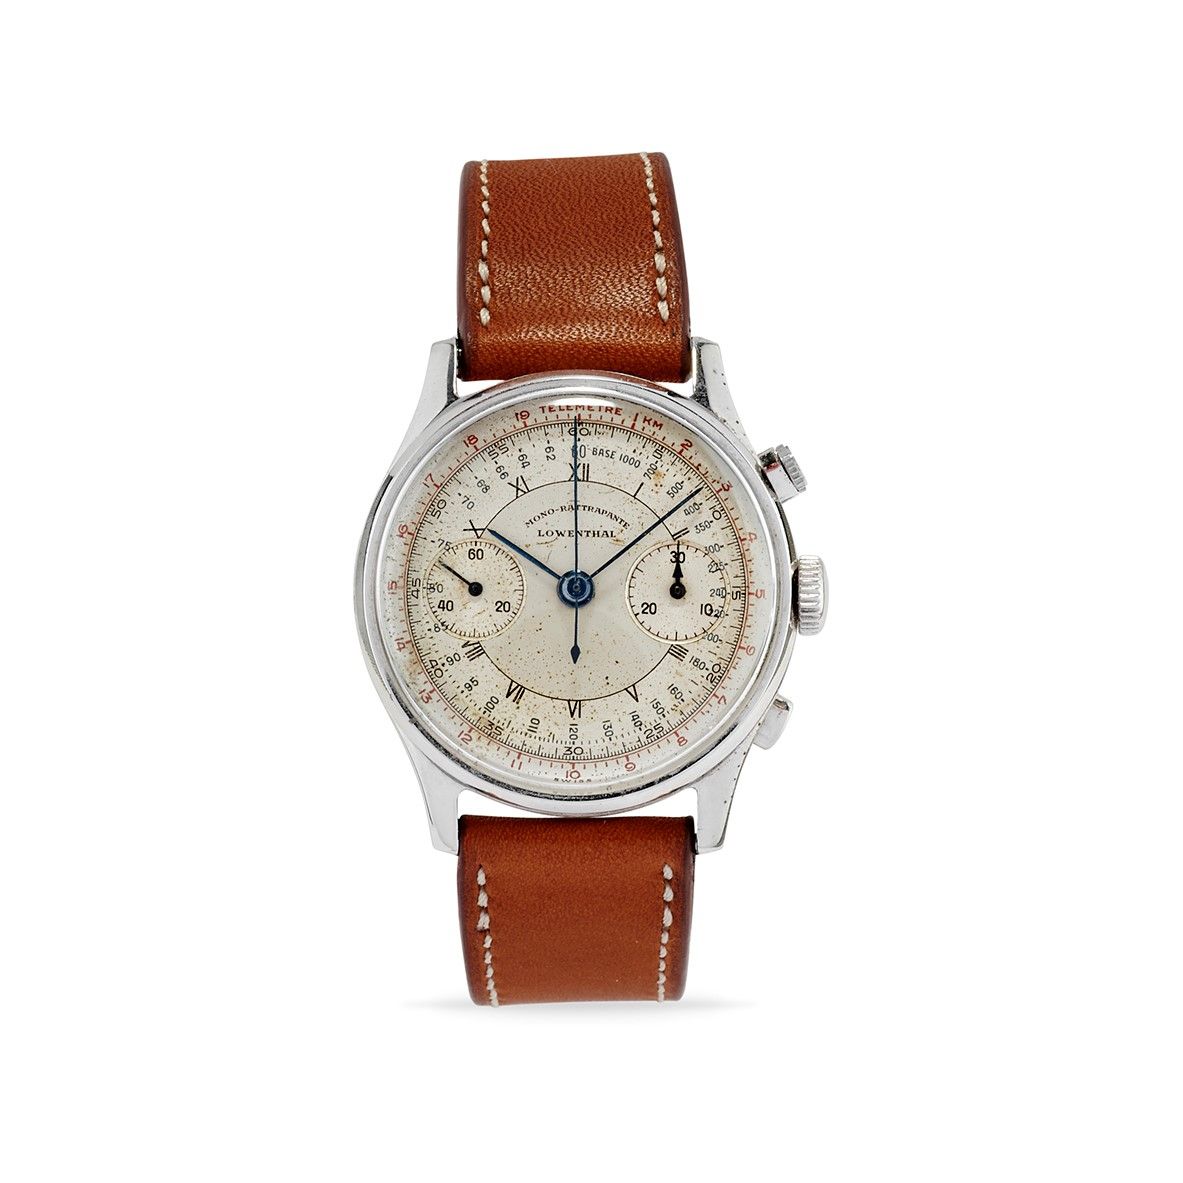 LOWENTHAL Lowenthal mono-rattrapante chronograph, ‘40s


Stainless steel and chr&hellip;